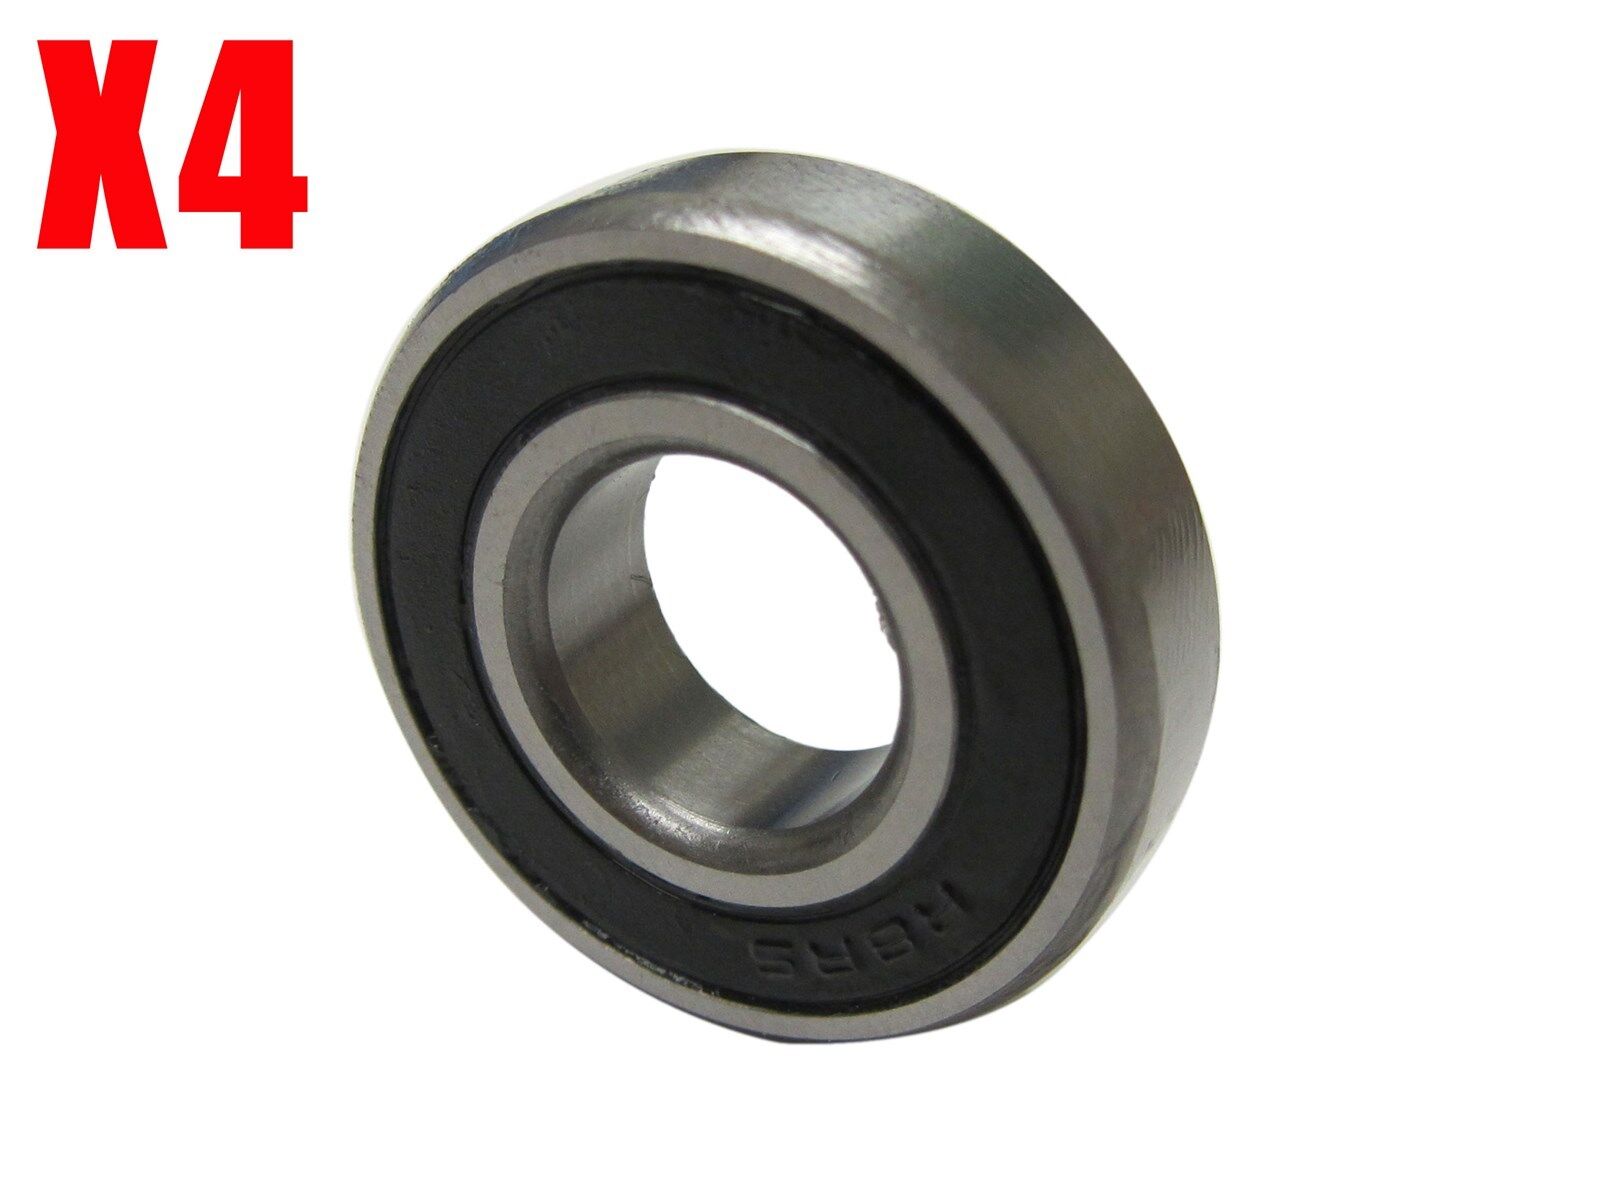 Set of 4, Wheel Spindle Bearing R8RS 1-1/8 OD x 1/2 ID Go Kart Racing Cart Parts